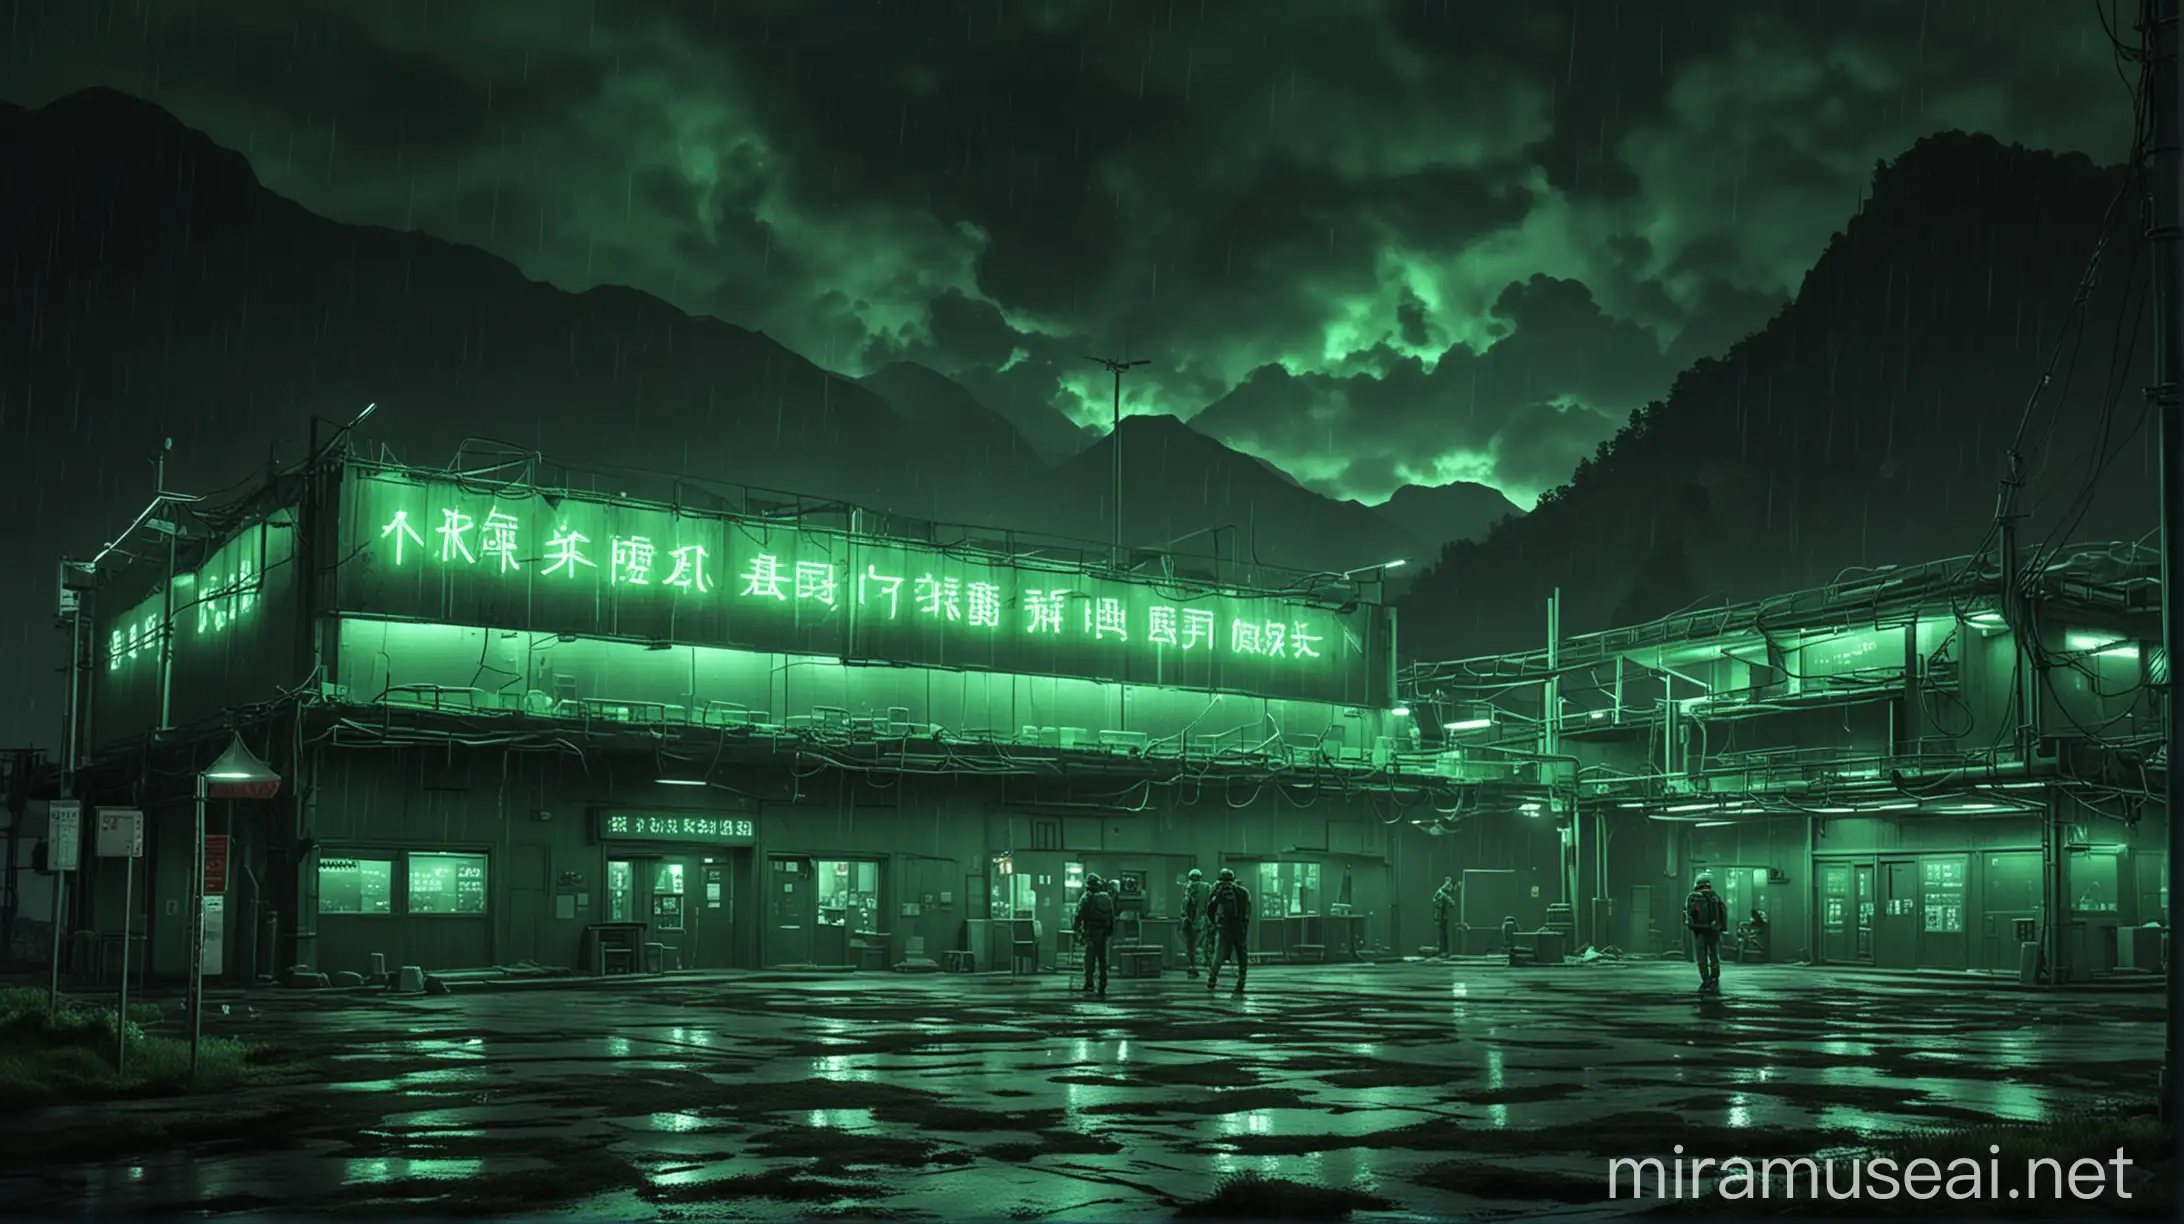 Realistic research centers buildings with one worker around it, green neon and huge neon lights inside the part, its color shadow on the floor, Rainy weather, staff in dark green uniforms and helmets, Atmospheric and cinematic, The huge structures, A dark green smoke rose from the research centers environment and spread in the air, The image space is outside the realistic research center.
with huge satellite antennas,
A huge cubic green neon object,
in the Realistic mountains.
atmospheric and cinematic.
All overall dark green image theme.
Very big lights and lots of green neon lights.
The neon lights in the image should be very bright throughout the image.
The neon lights in the picture should be very bright in the dark
The neon lights in the picture should be very bright.
Very large and bright neon lamps in the structure.
Shades of green throughout the image.
3D.
Several large advanced and strange buildings nearby.
With large Japanese inscriptions on the structure. dark sky 